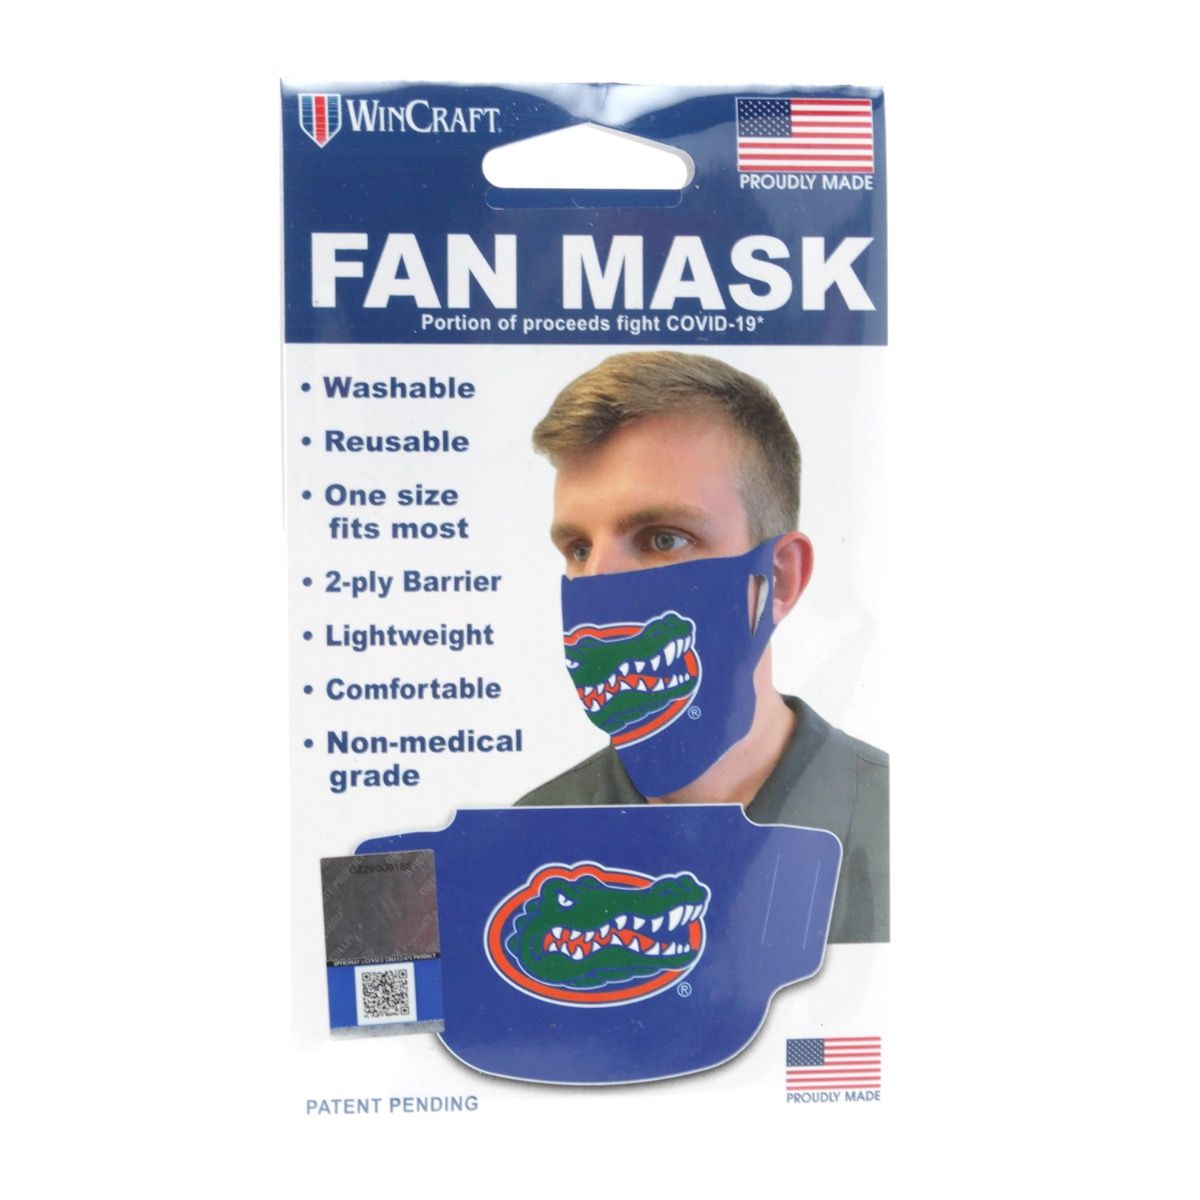 University of Florida Logo Face Mask by Cufflinks Inc. - Country Club Prep